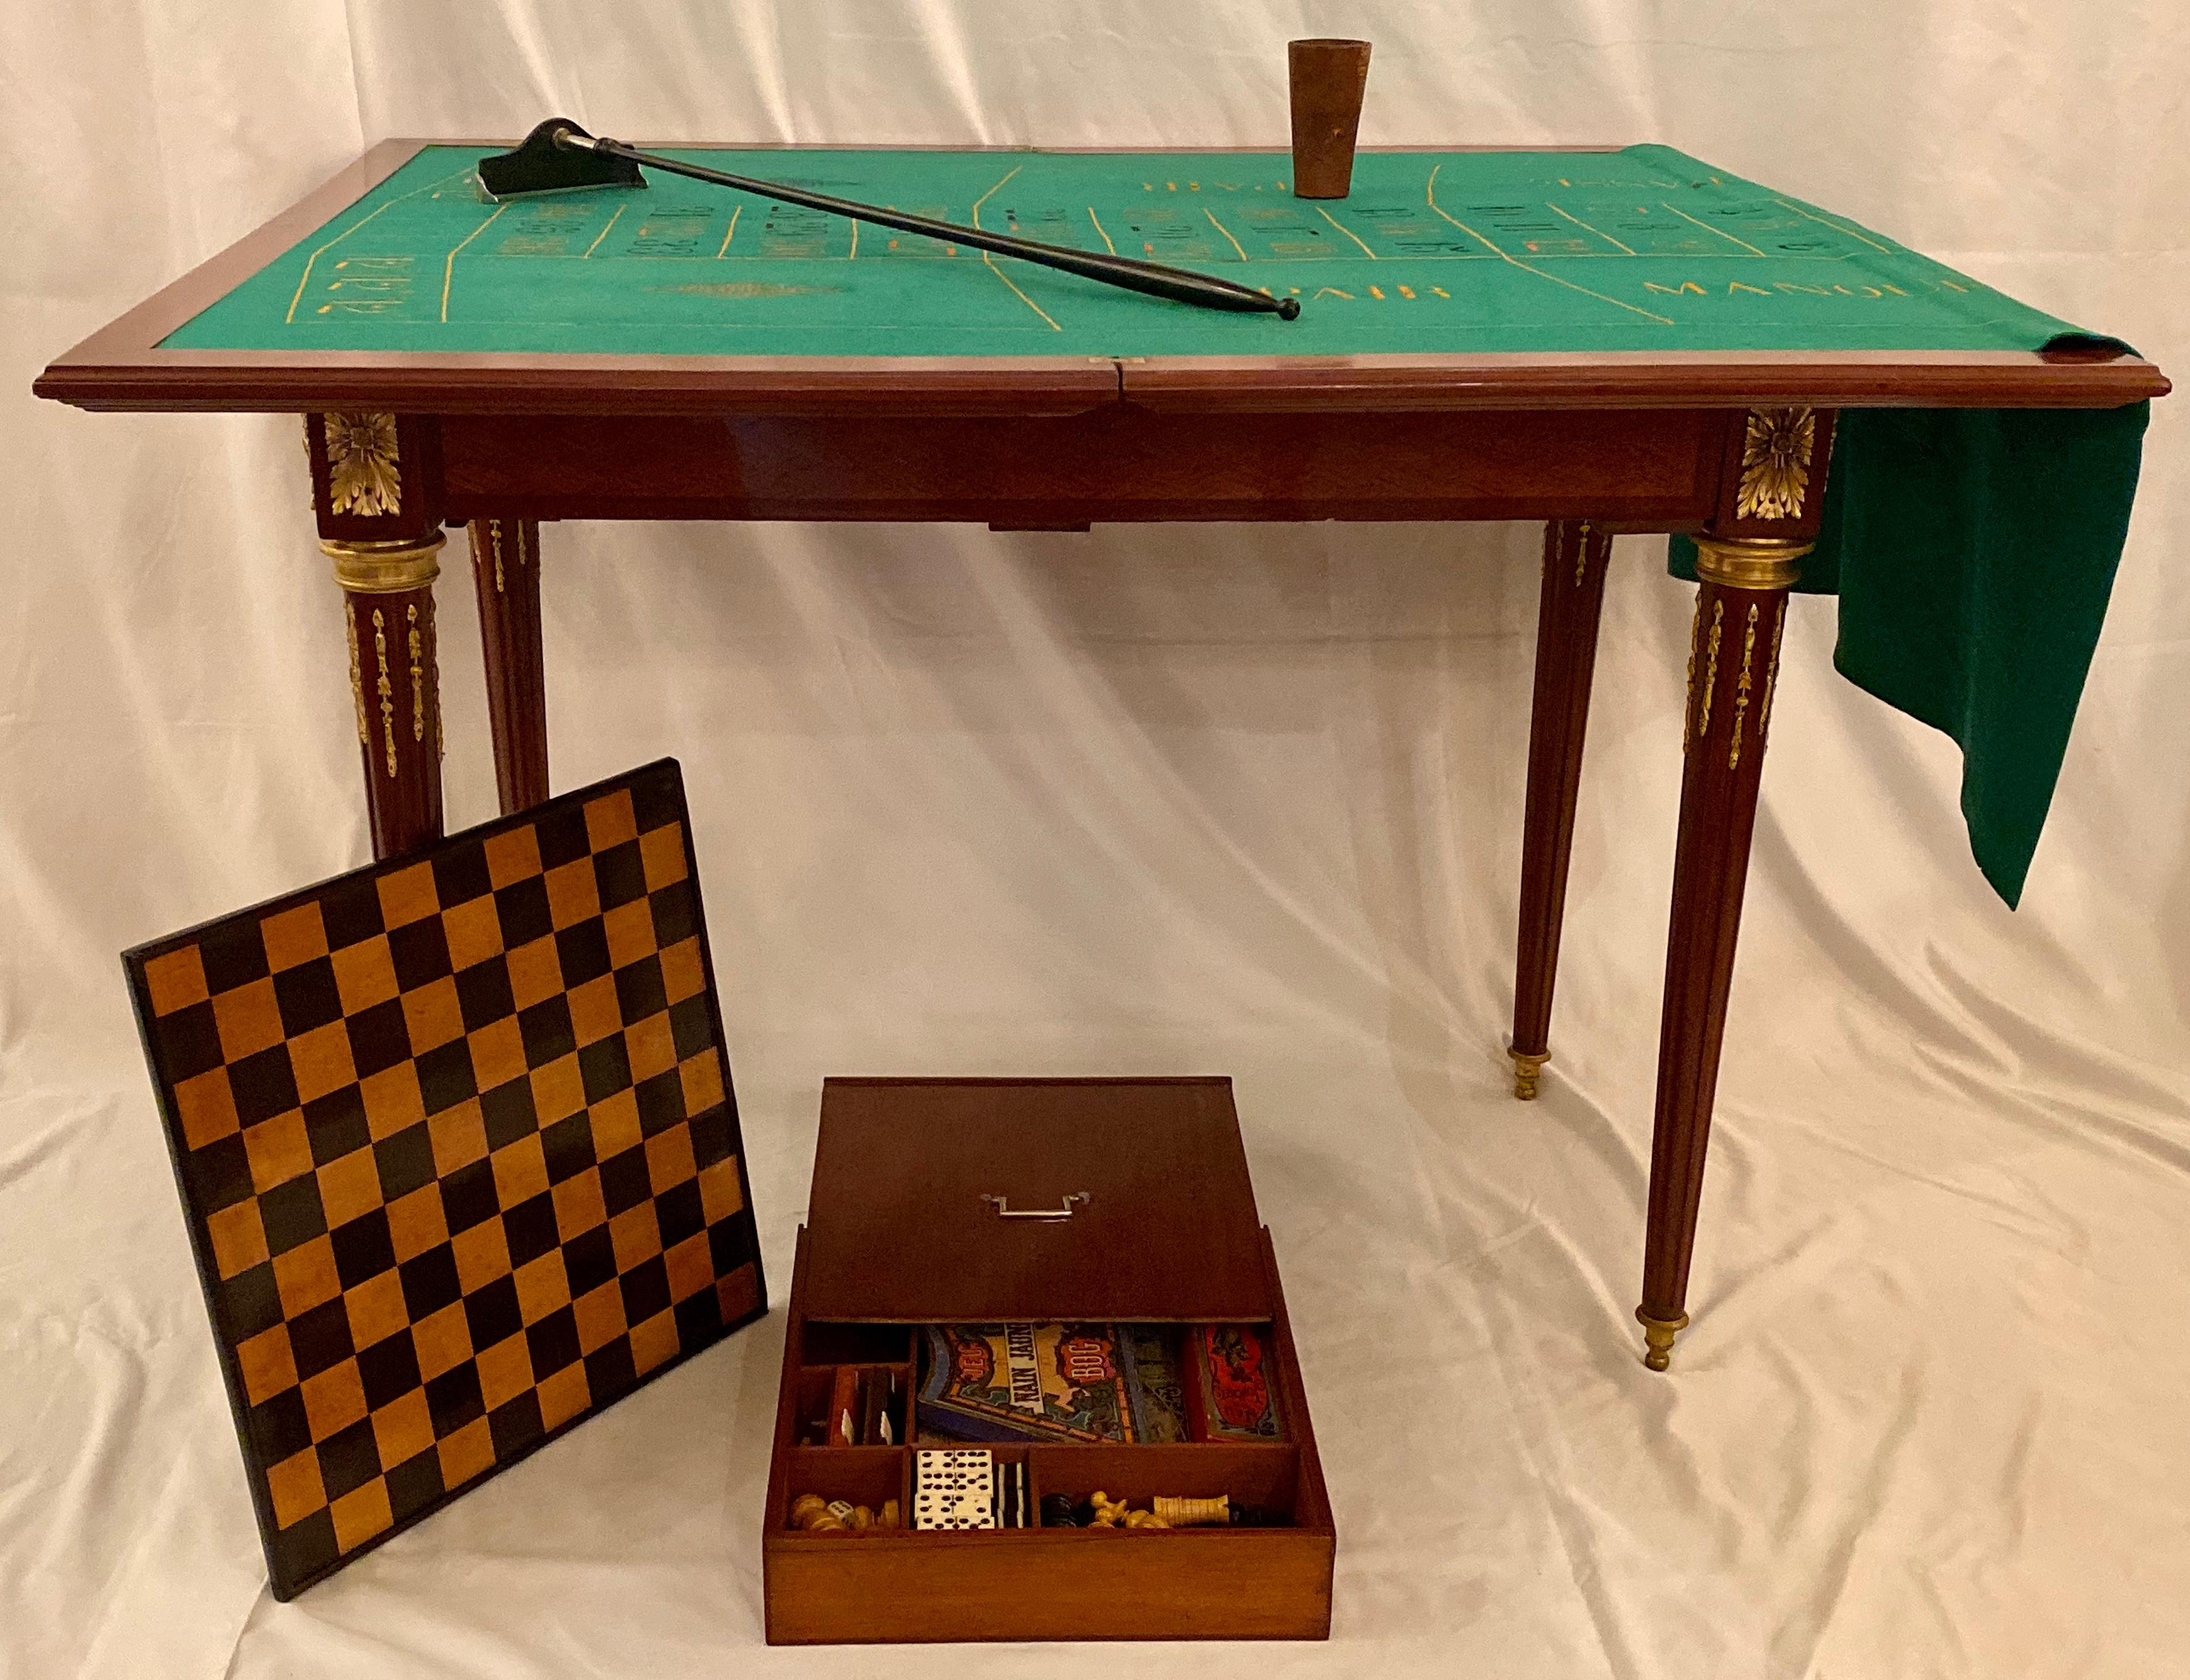 This roulette table with its games compendium is marvelous. Everything about the table speaks of fine craftsmanship and playful games times. It is not often that we can find a roulette table with all its acompaniments!.
 